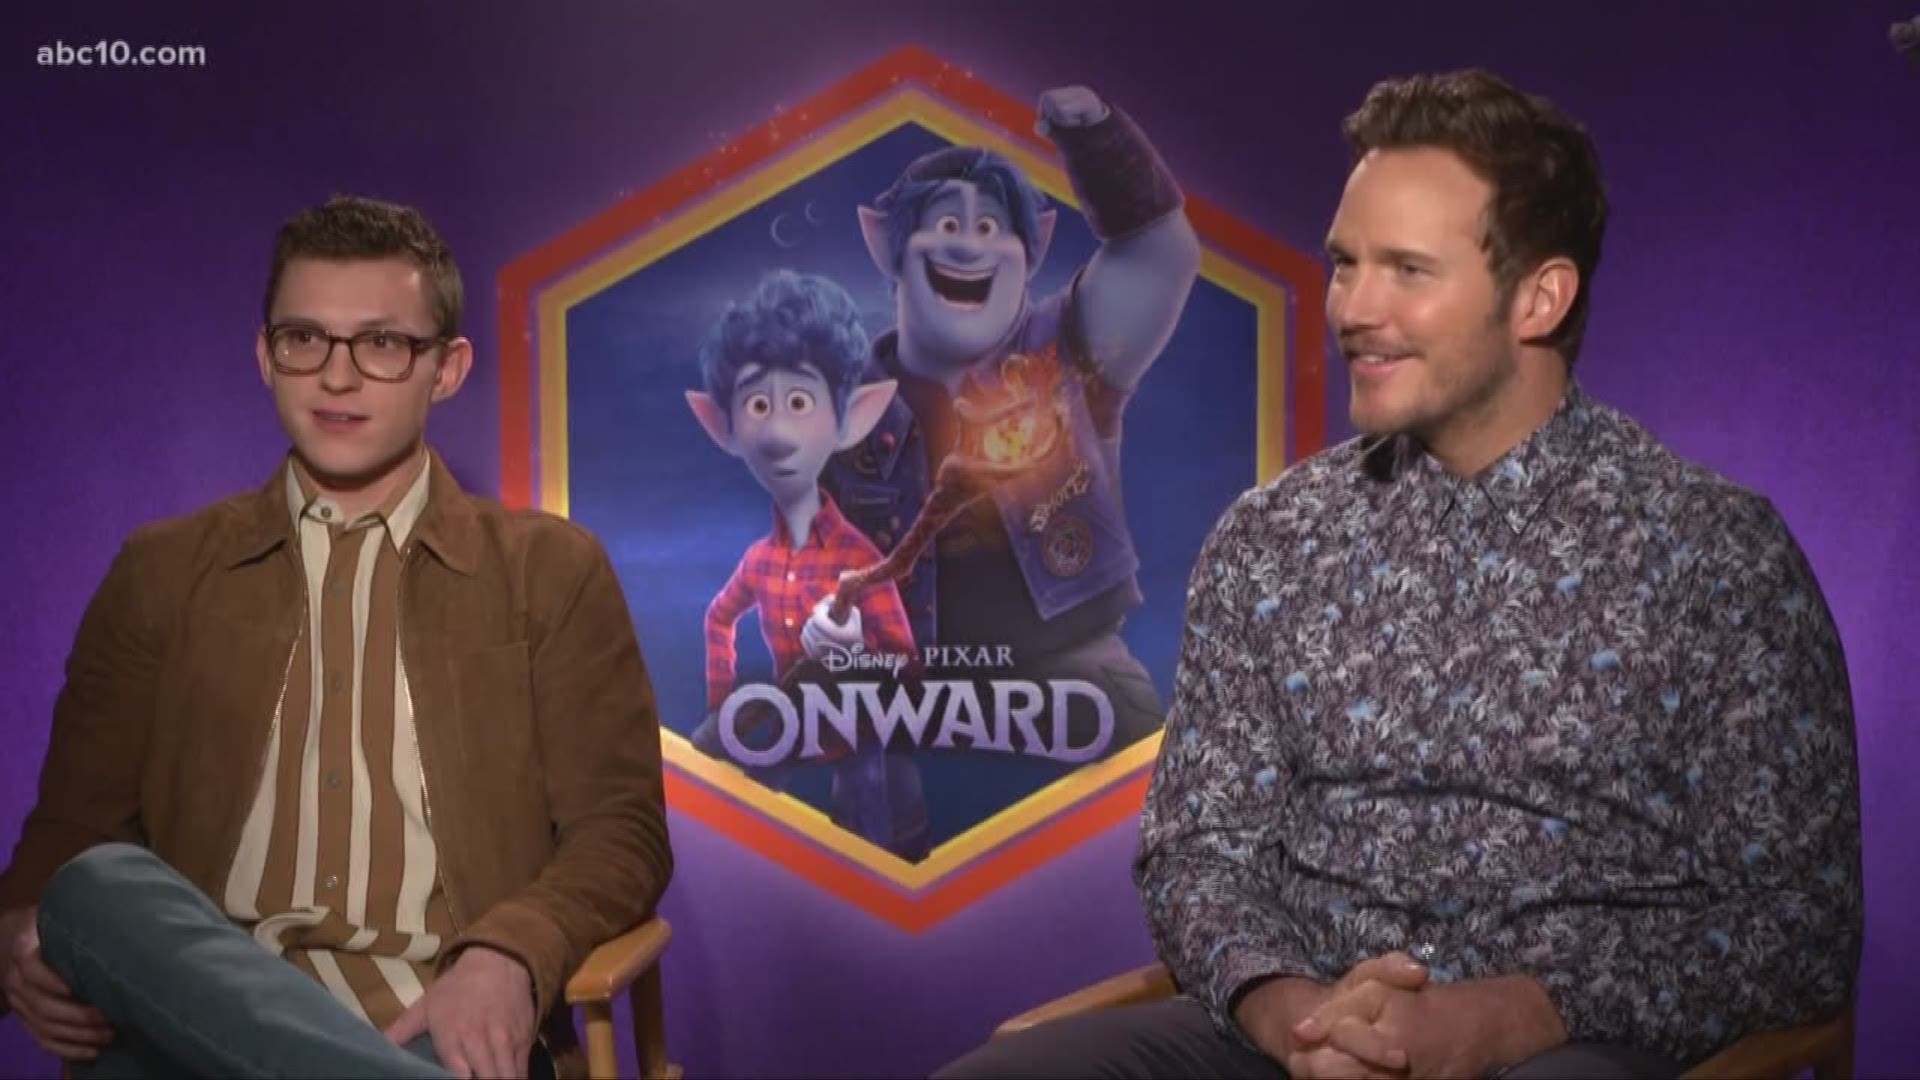 Mark S. Allen interviews Tom Holland and Chris Pratt, stars of the new Pixar movie "Onward," with a special surprise guest.